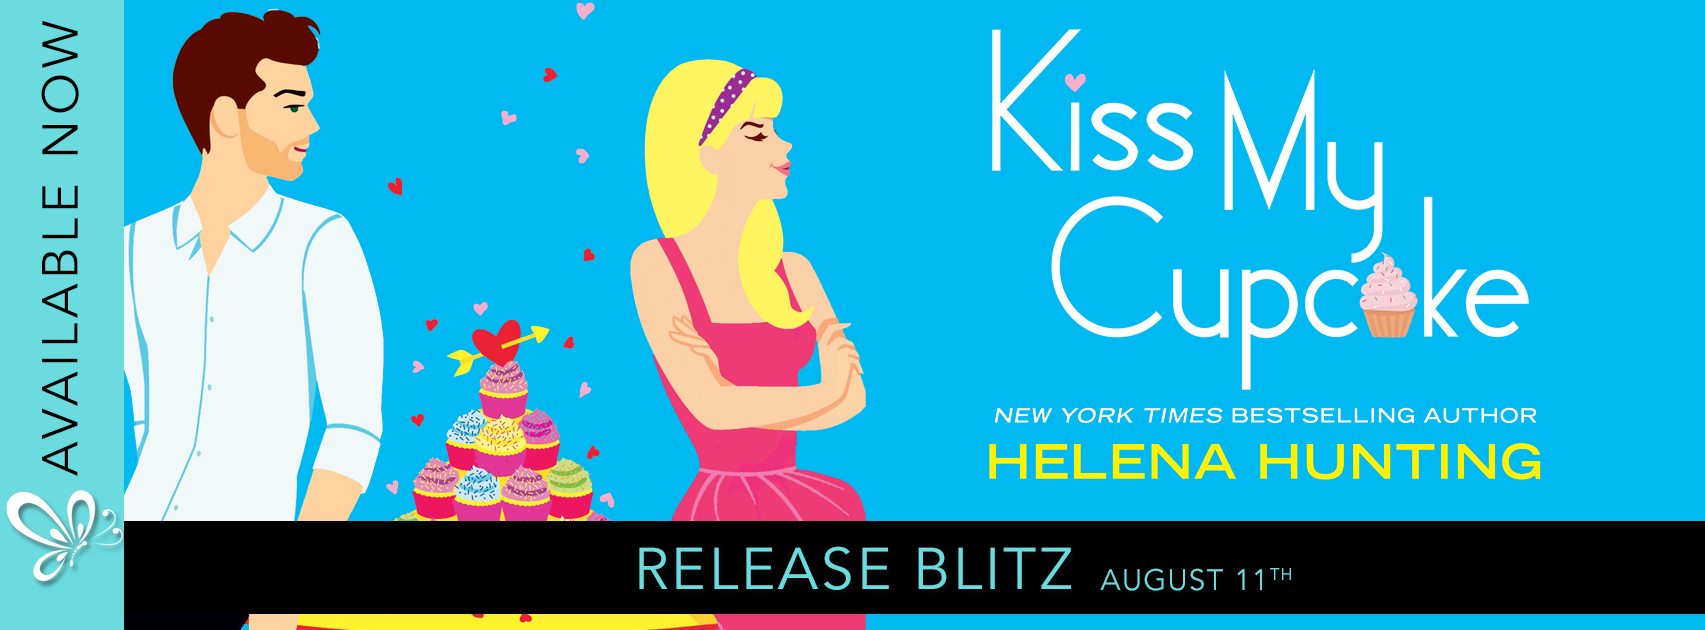 Release Blitz and Spotlight: Kiss My Cupcake by Helena Hunting